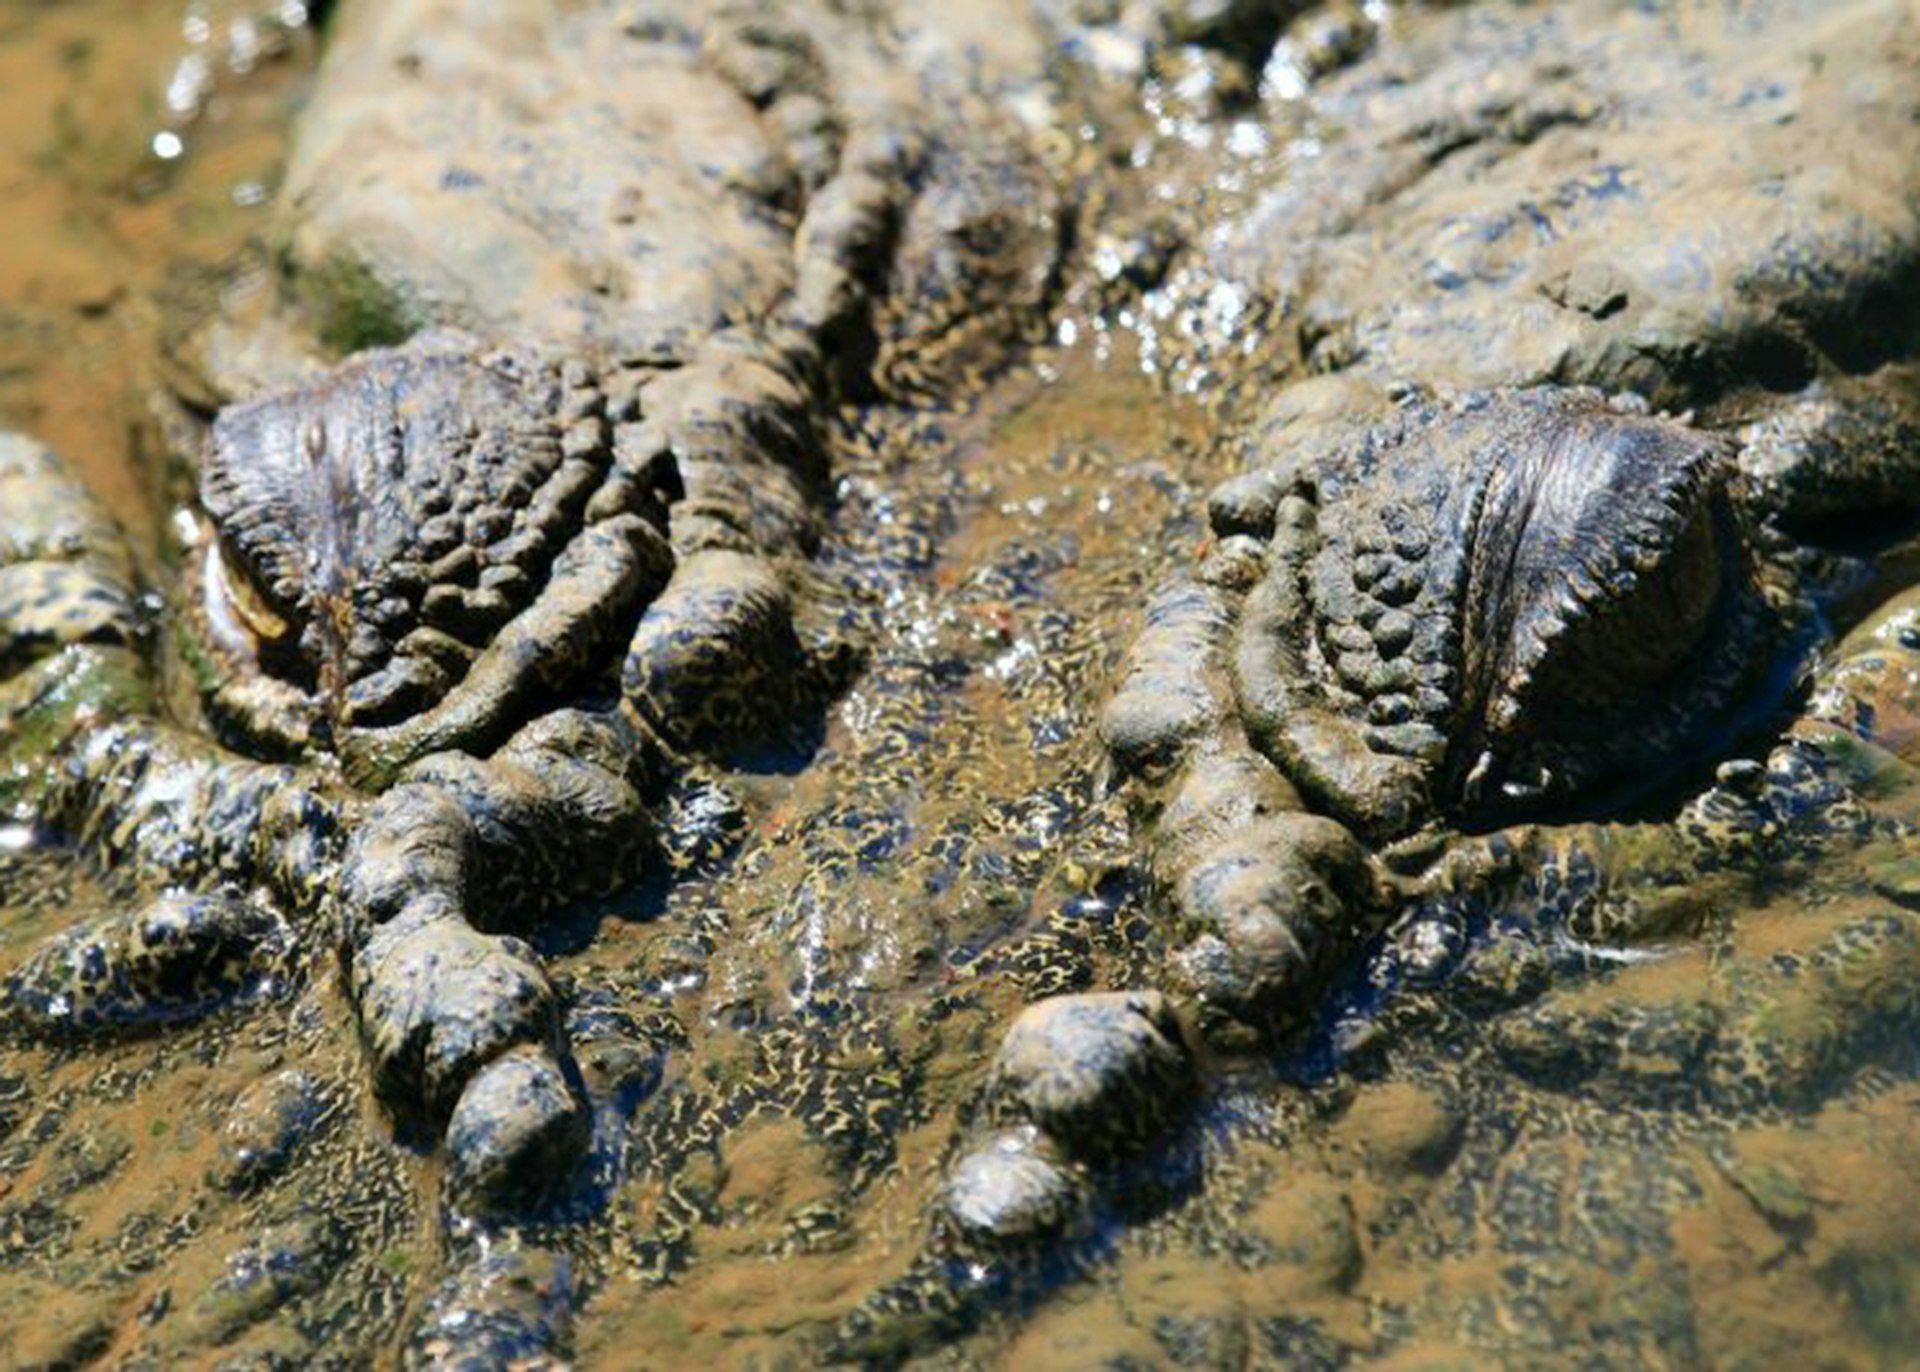 A close-up of a saltwater crocodile in Australia's Kimberley Region ©Johan Rentmeesters / Lonely Planet 